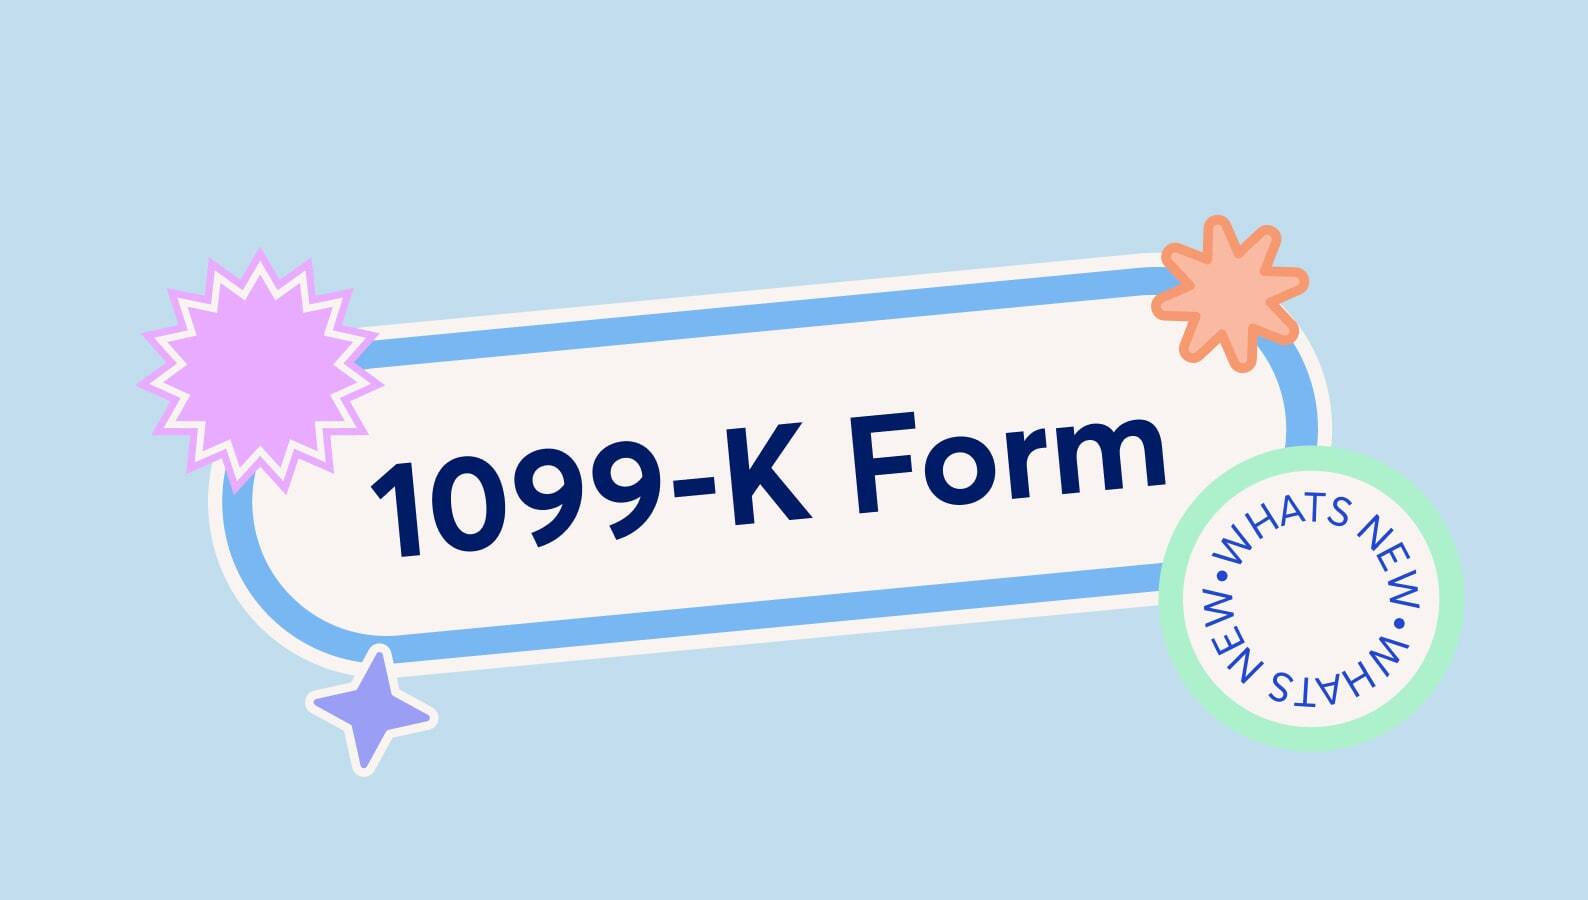 The most up-to-date information on Form 1099-K